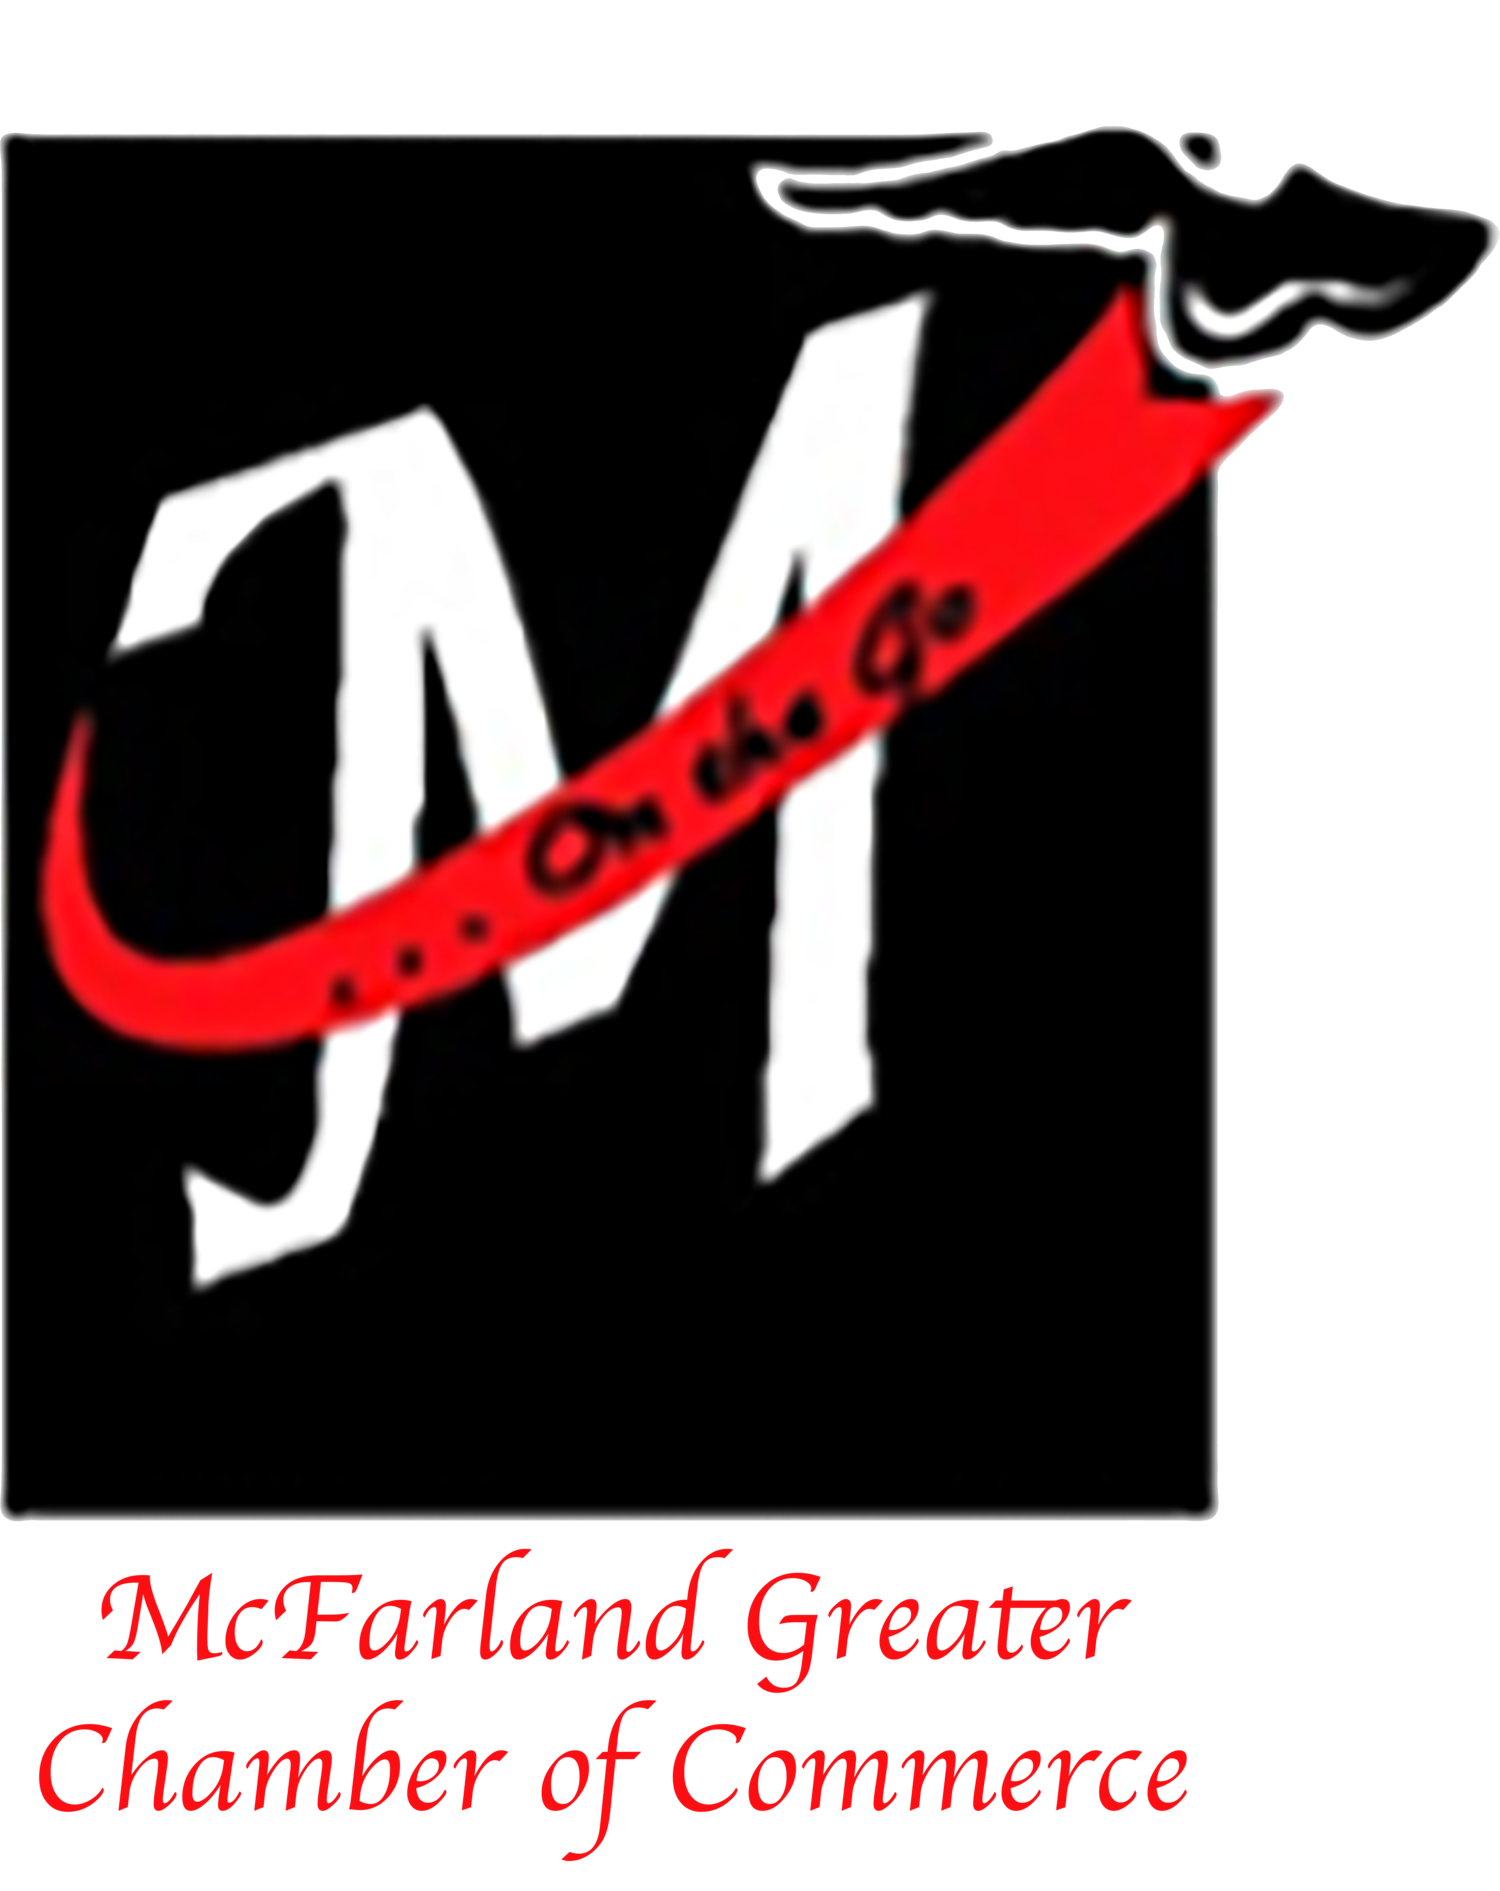 McFarland Greater Chamber of Commerce